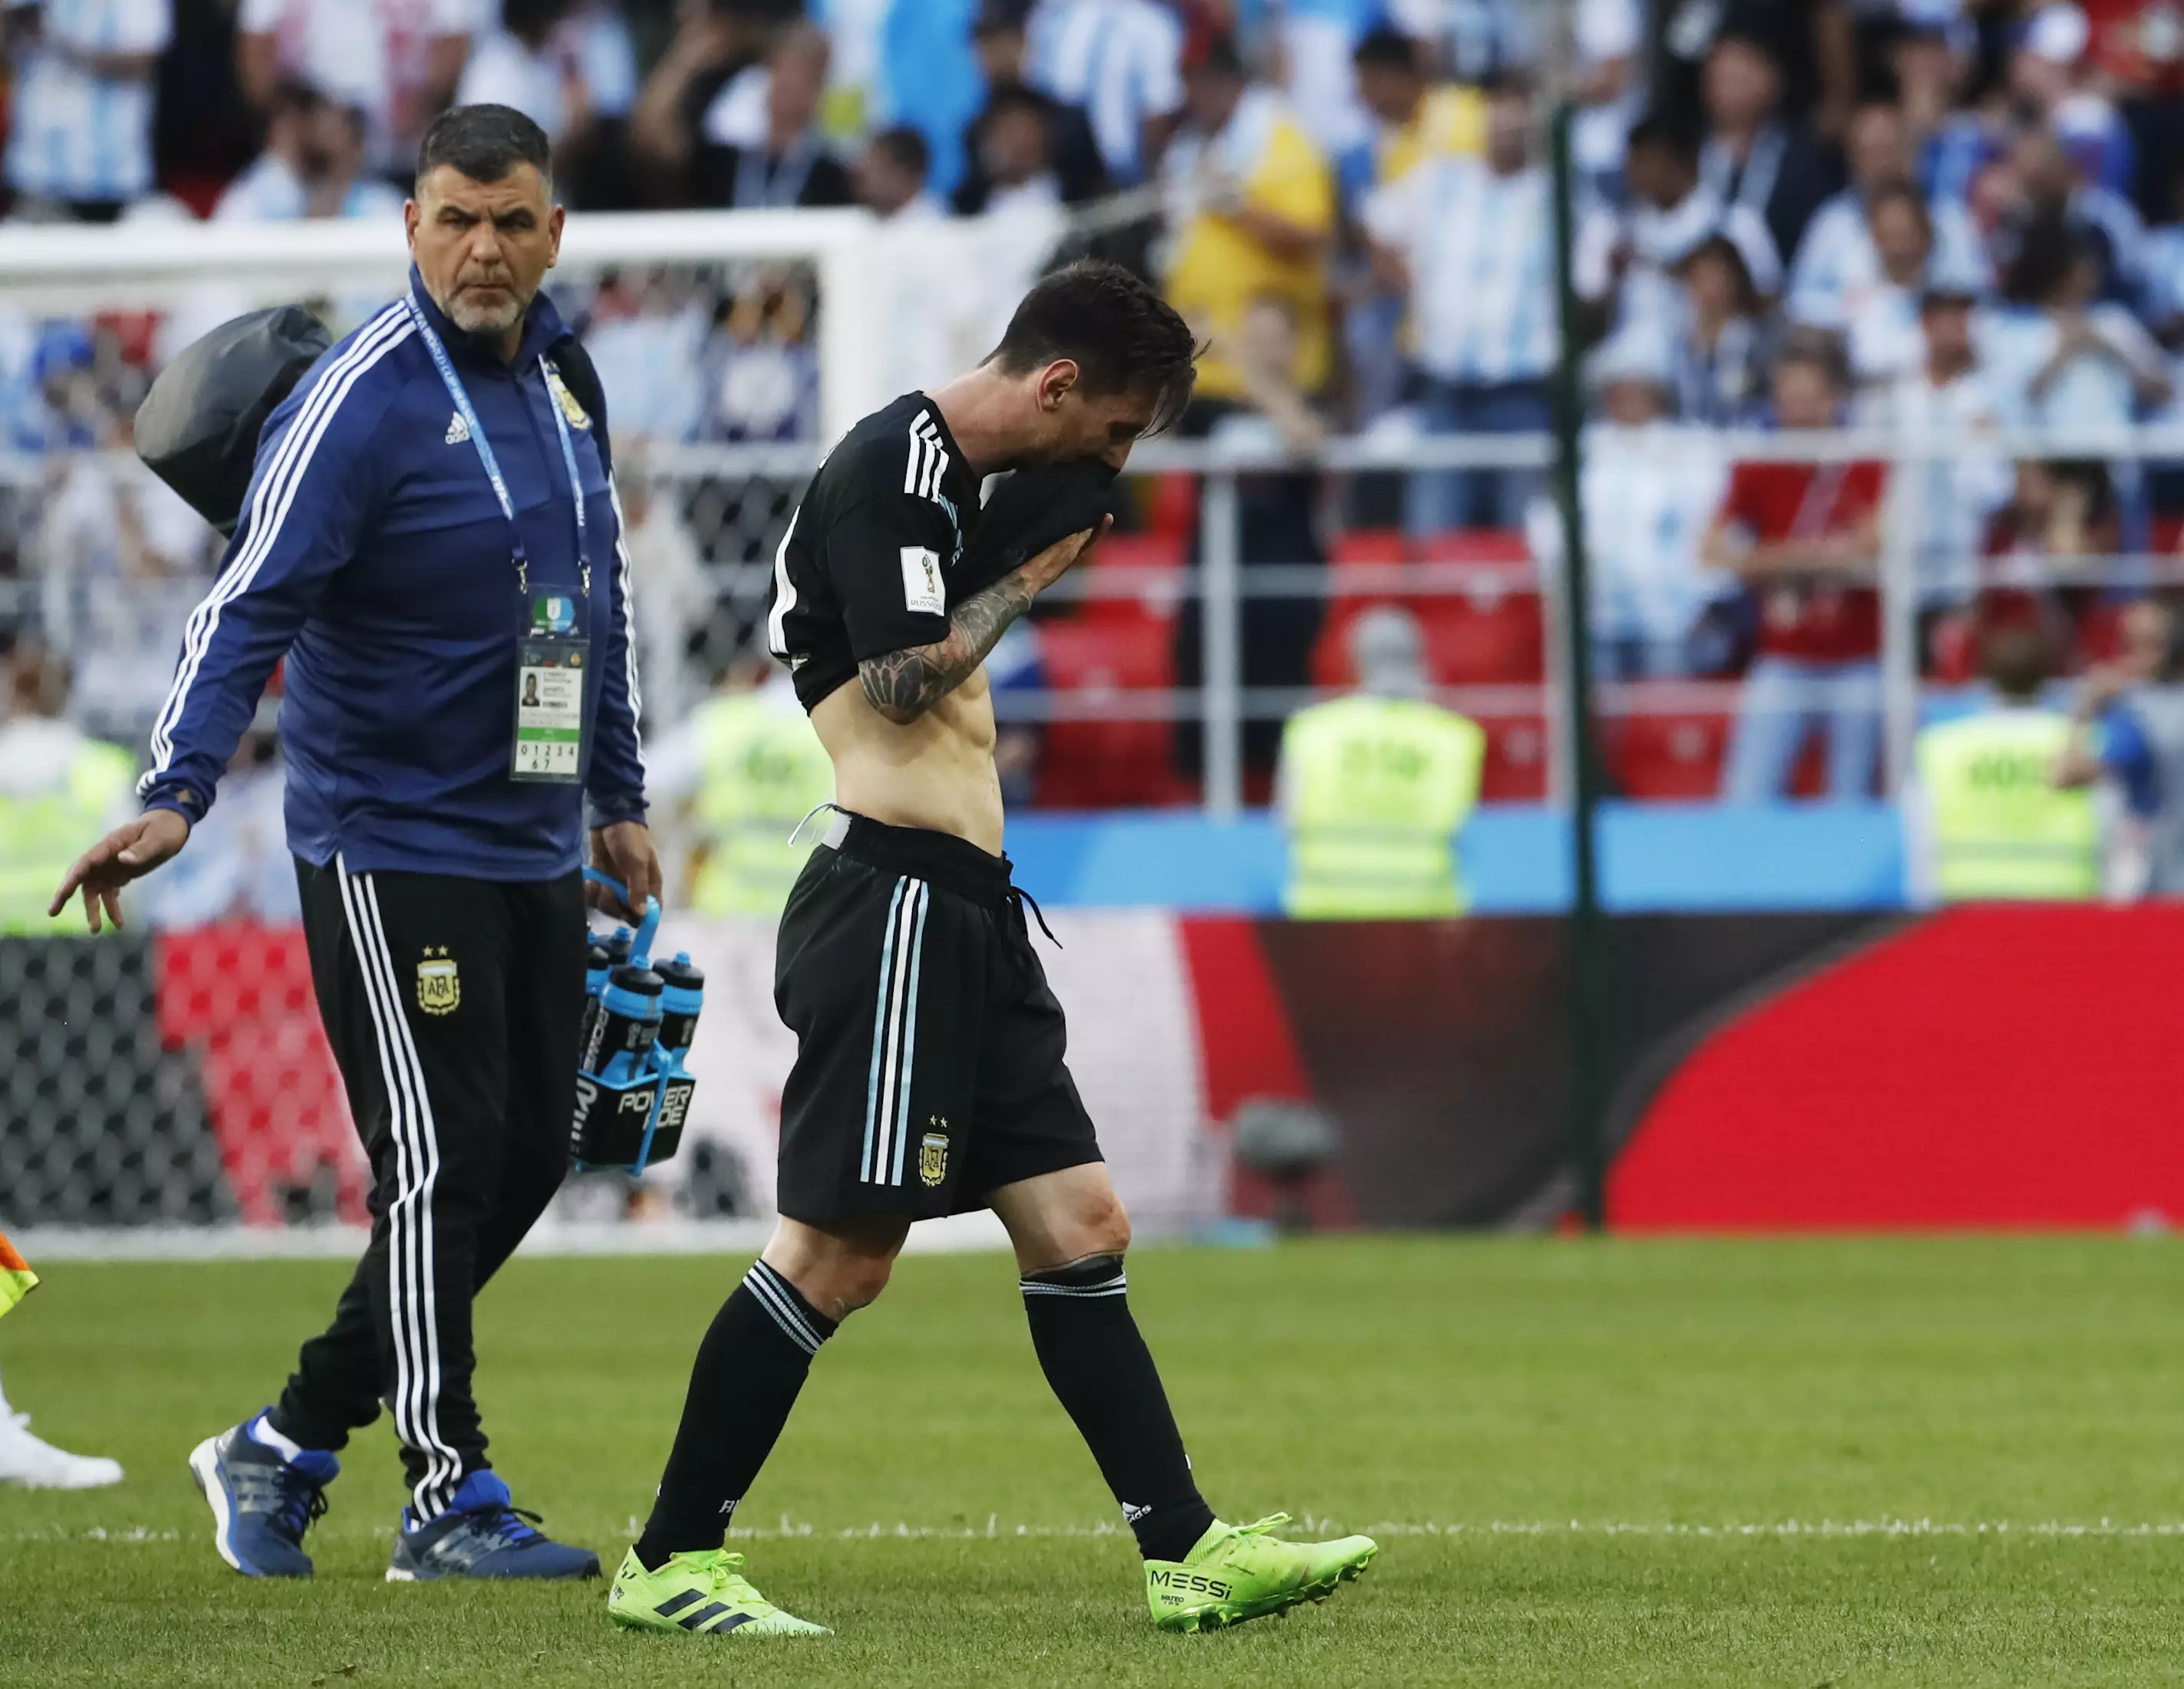 Messi cuts a dejected figure. Image: PA